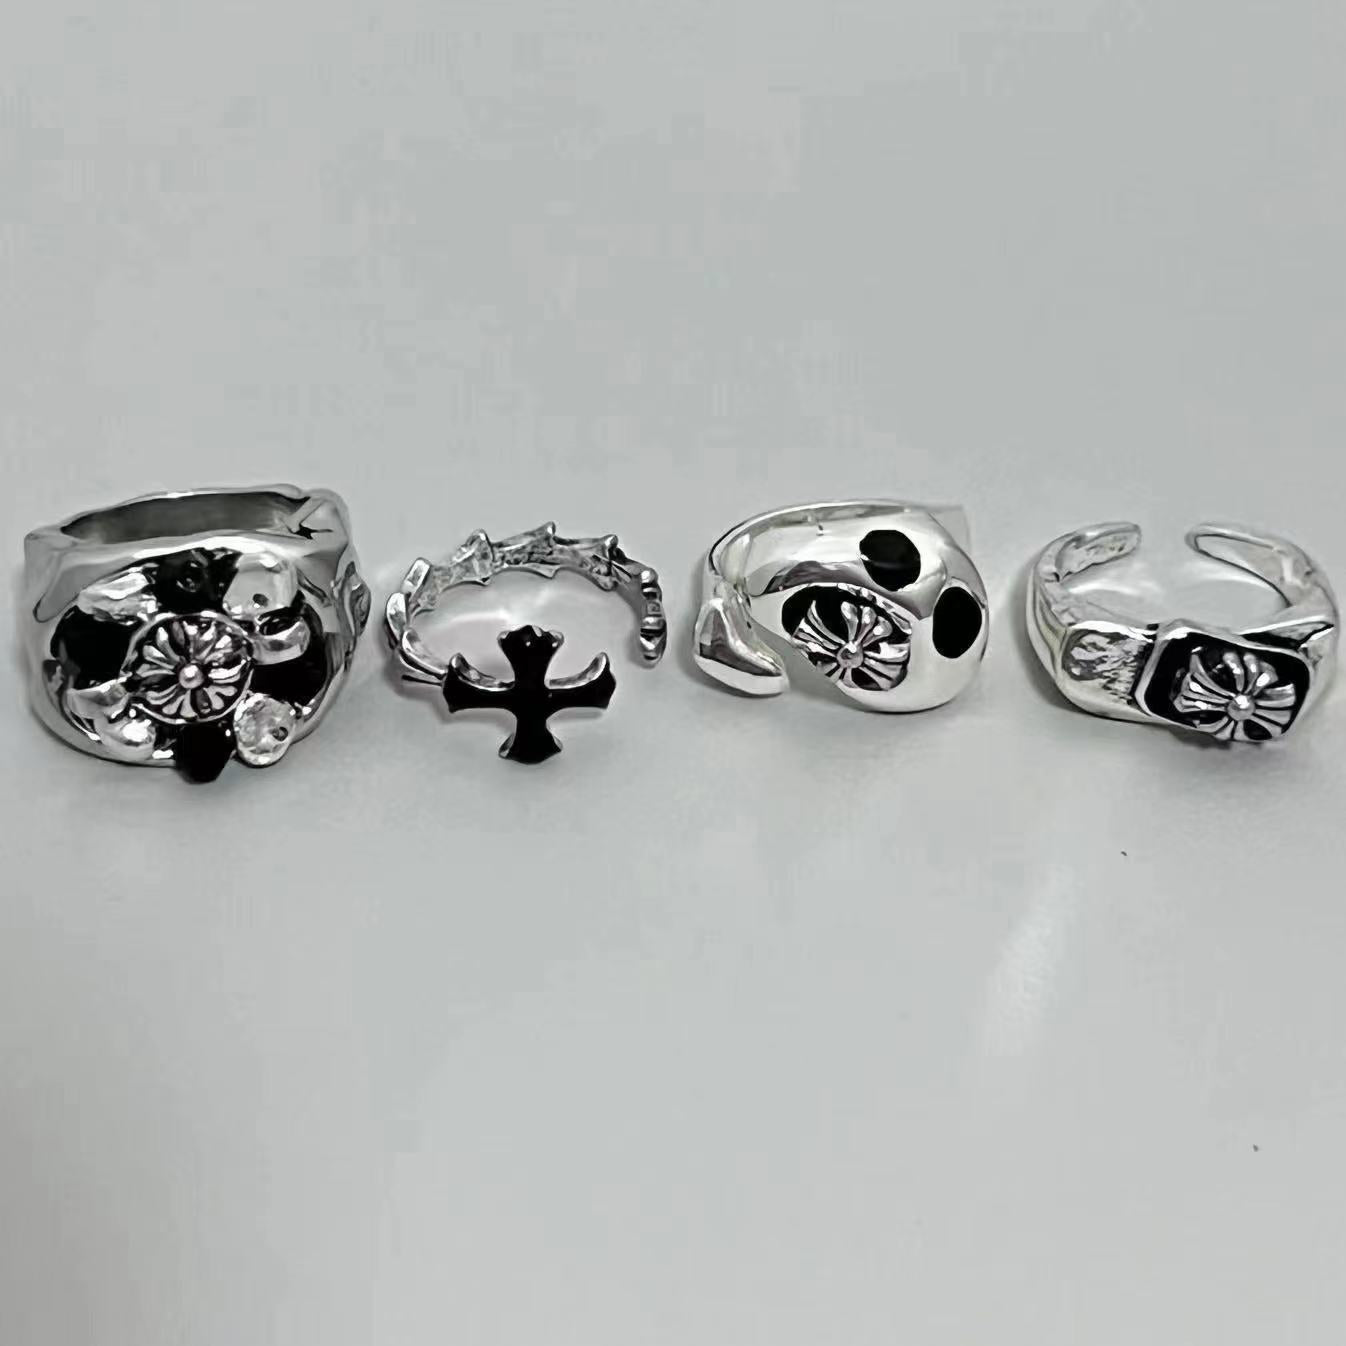 Original Genderless Couple Ring with Small Design Fragmented Theory Ring: Men and Women's Fashion Pair Ring